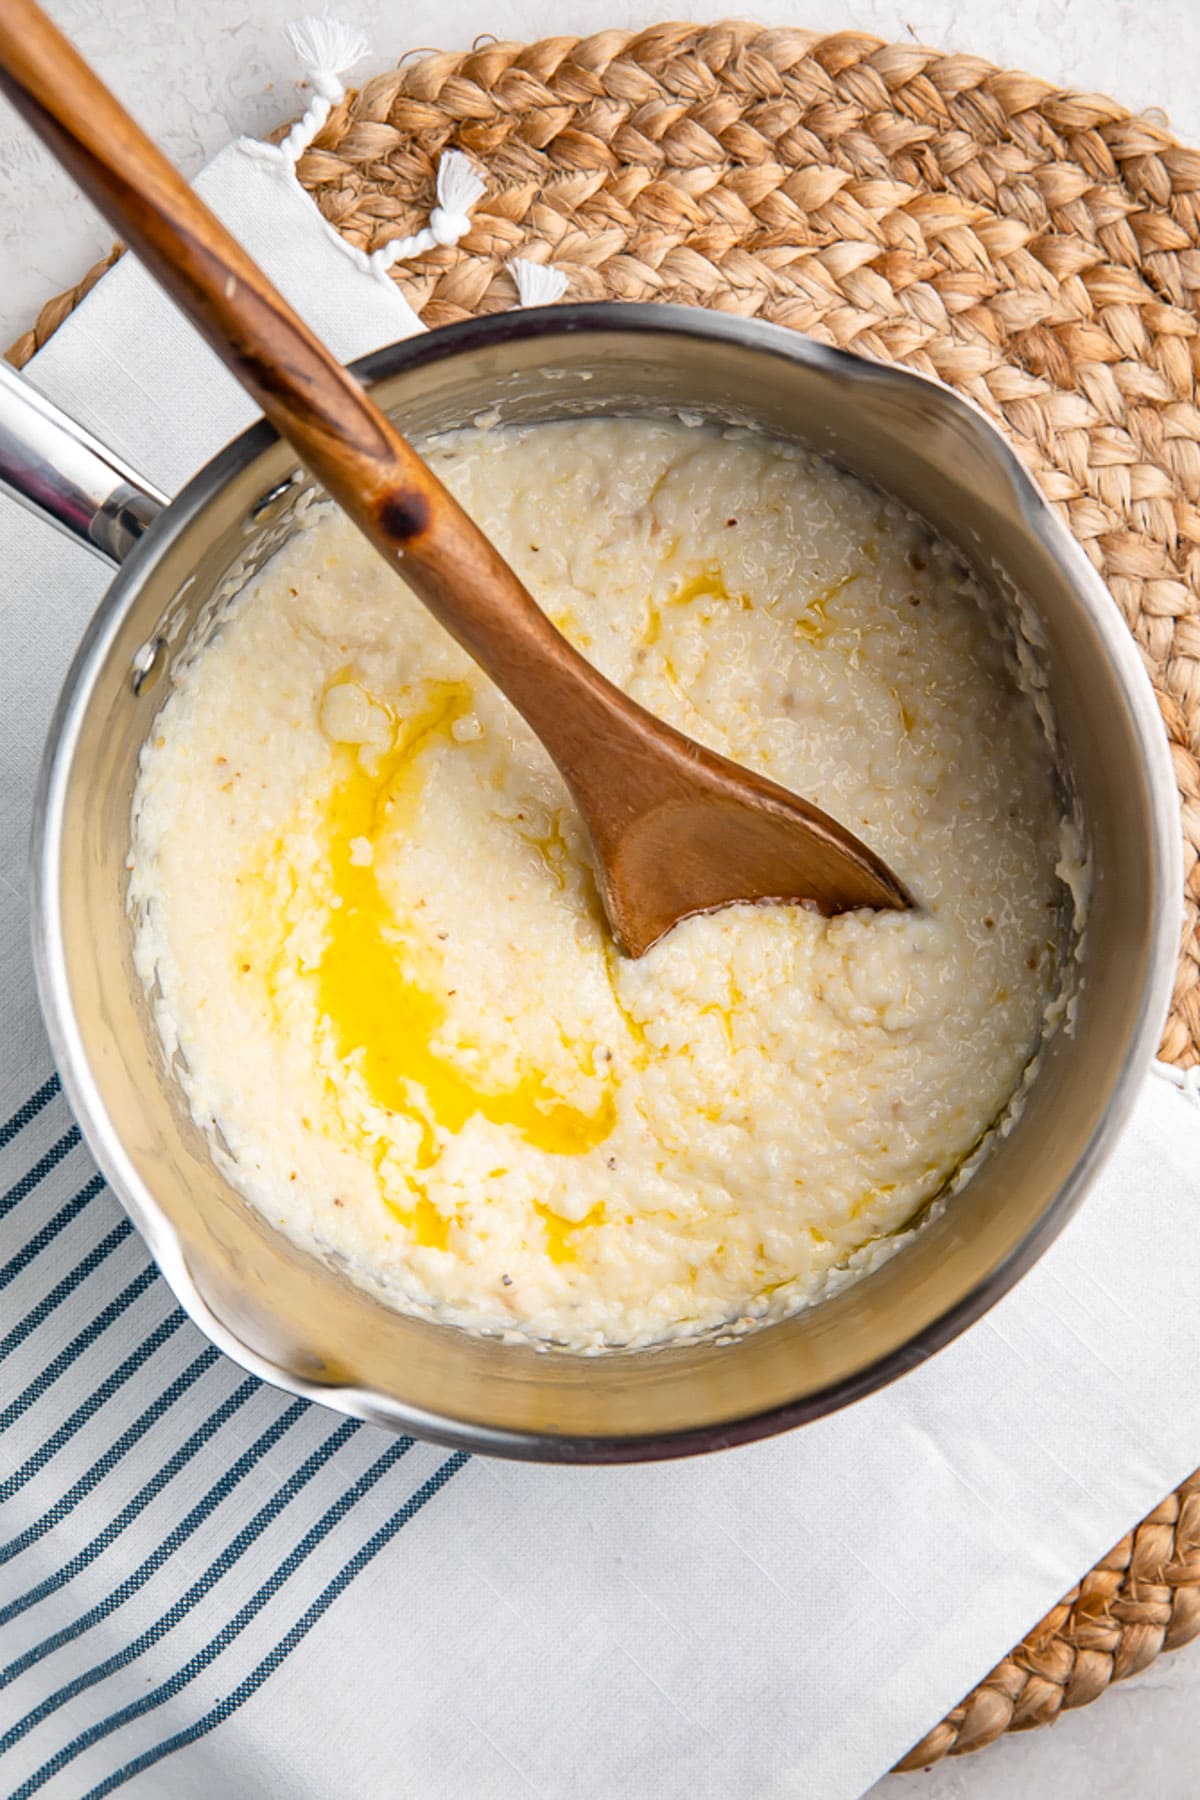 Overhead view of creamy grits in a silver saucepan, with a pat of melting butter swirled in the center.